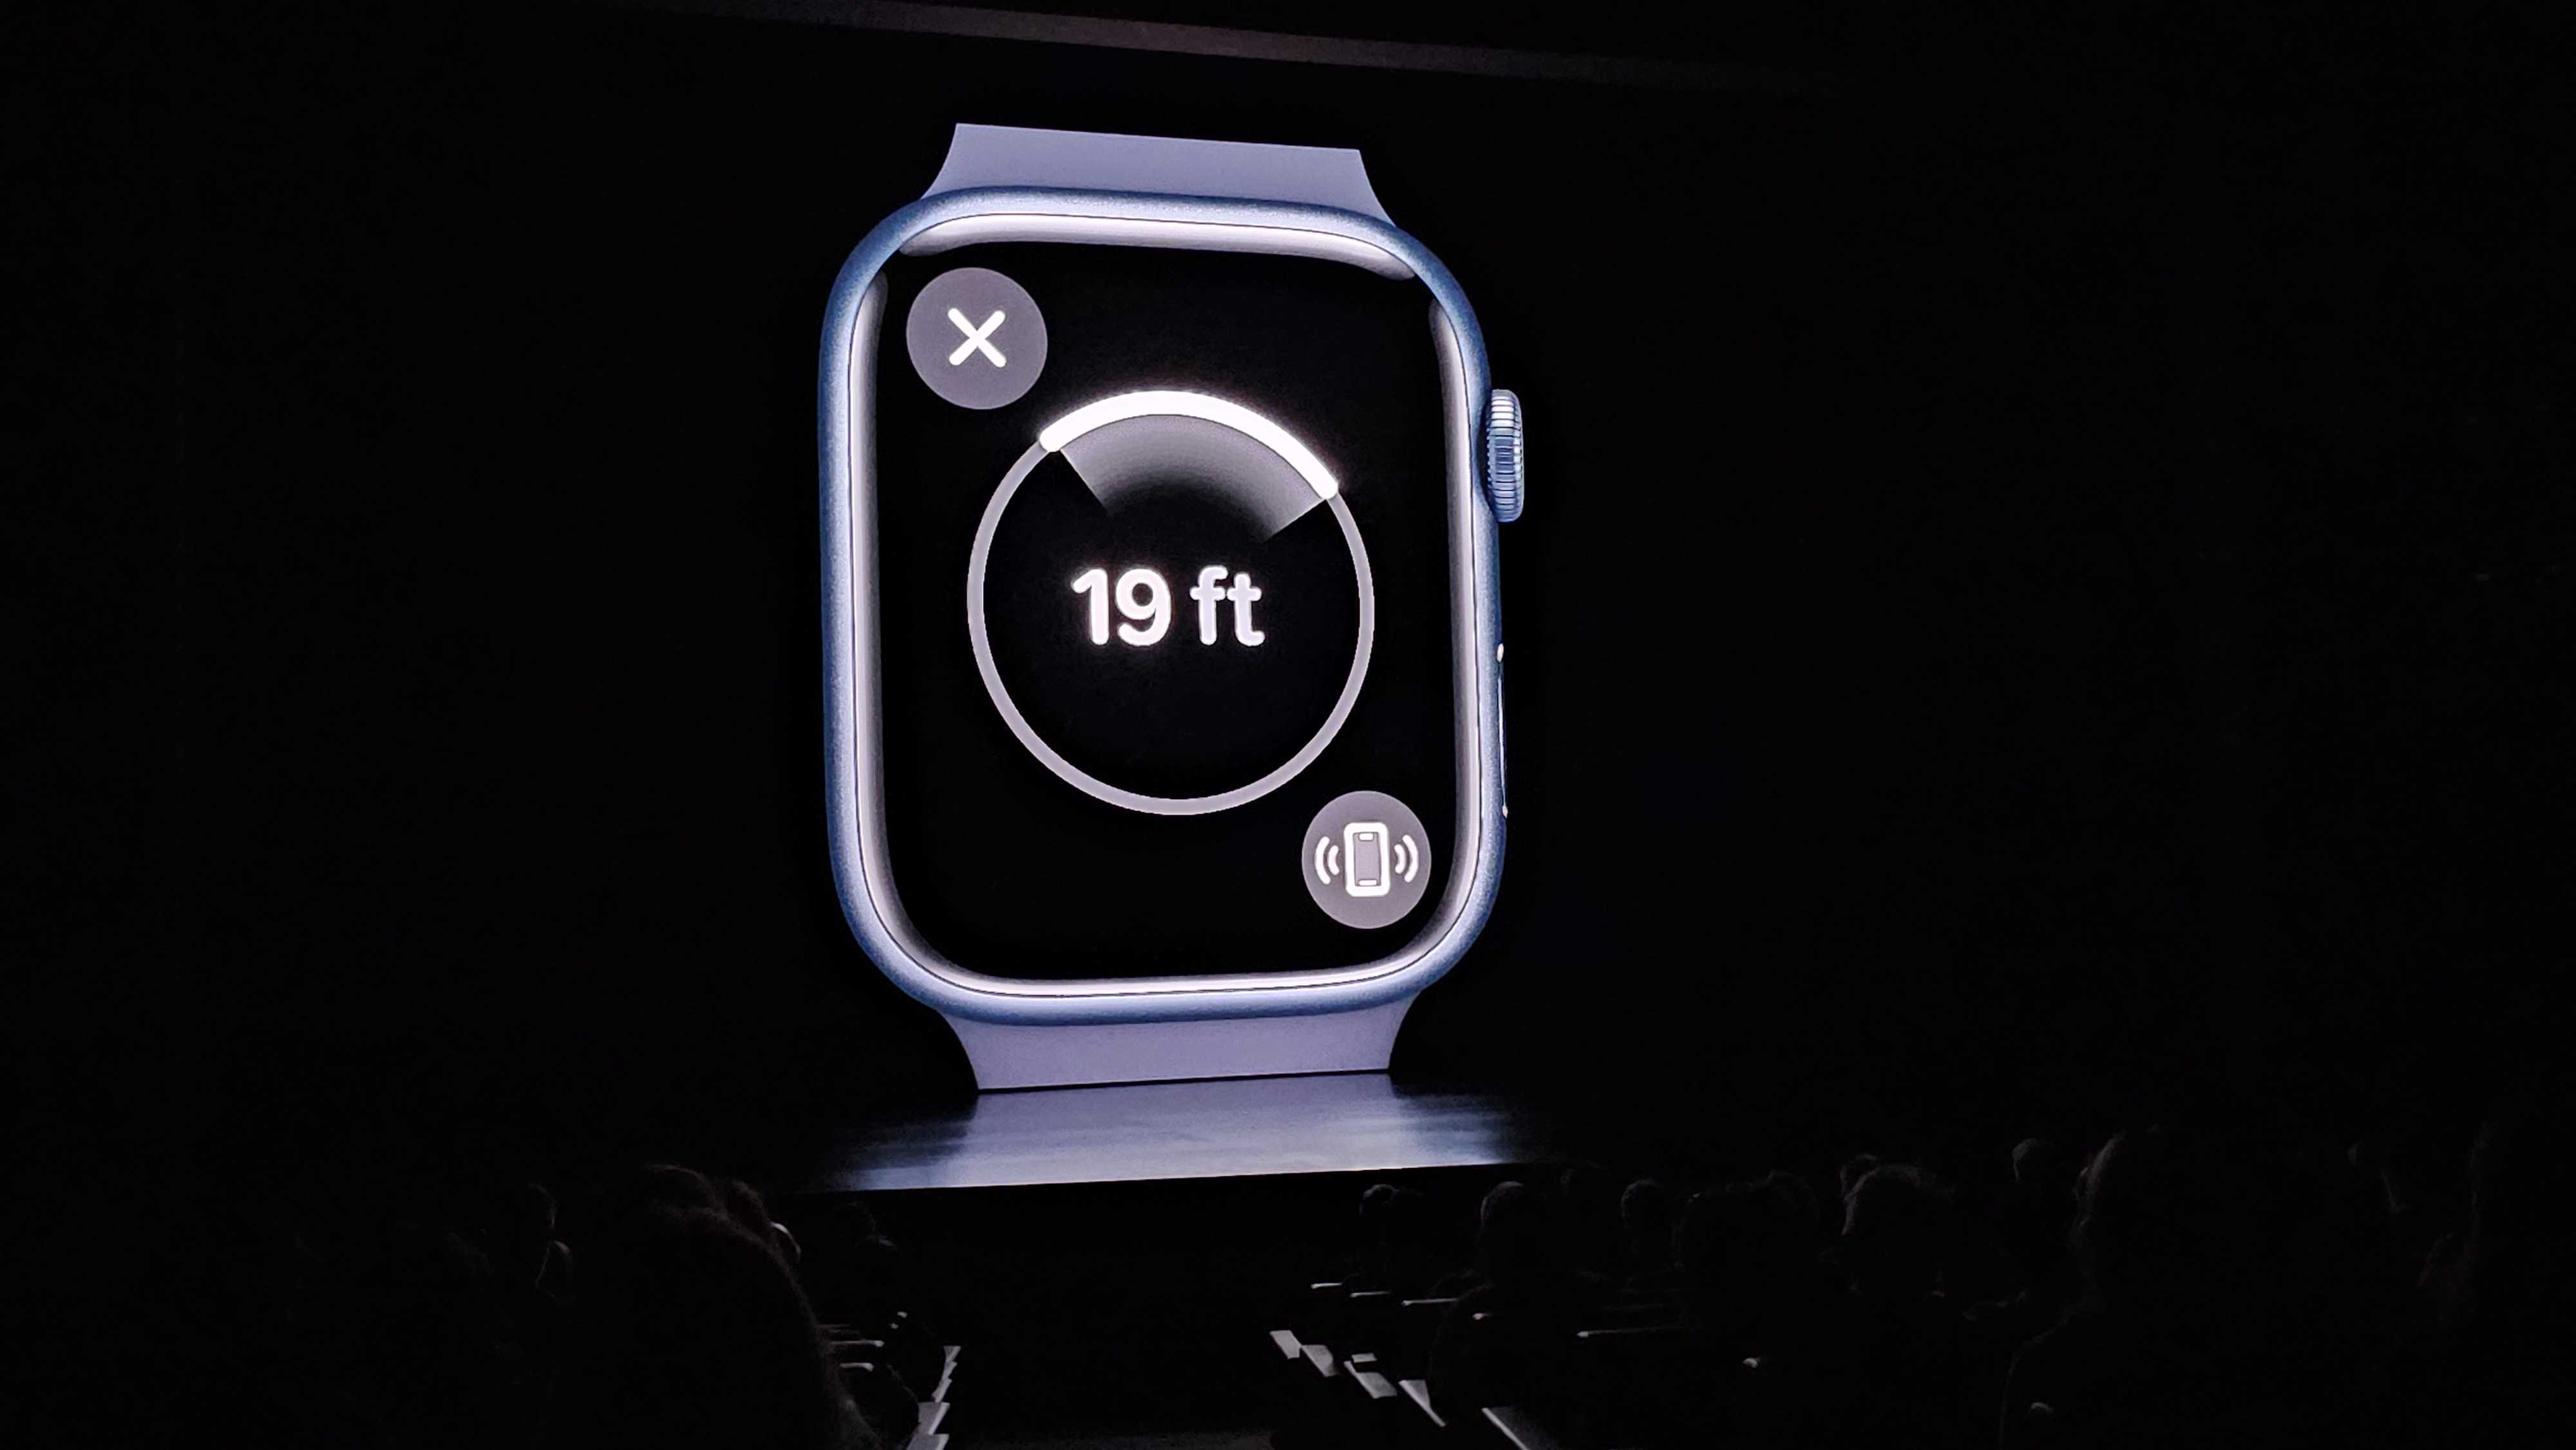 Apple Watch showing iPhone finder on screen